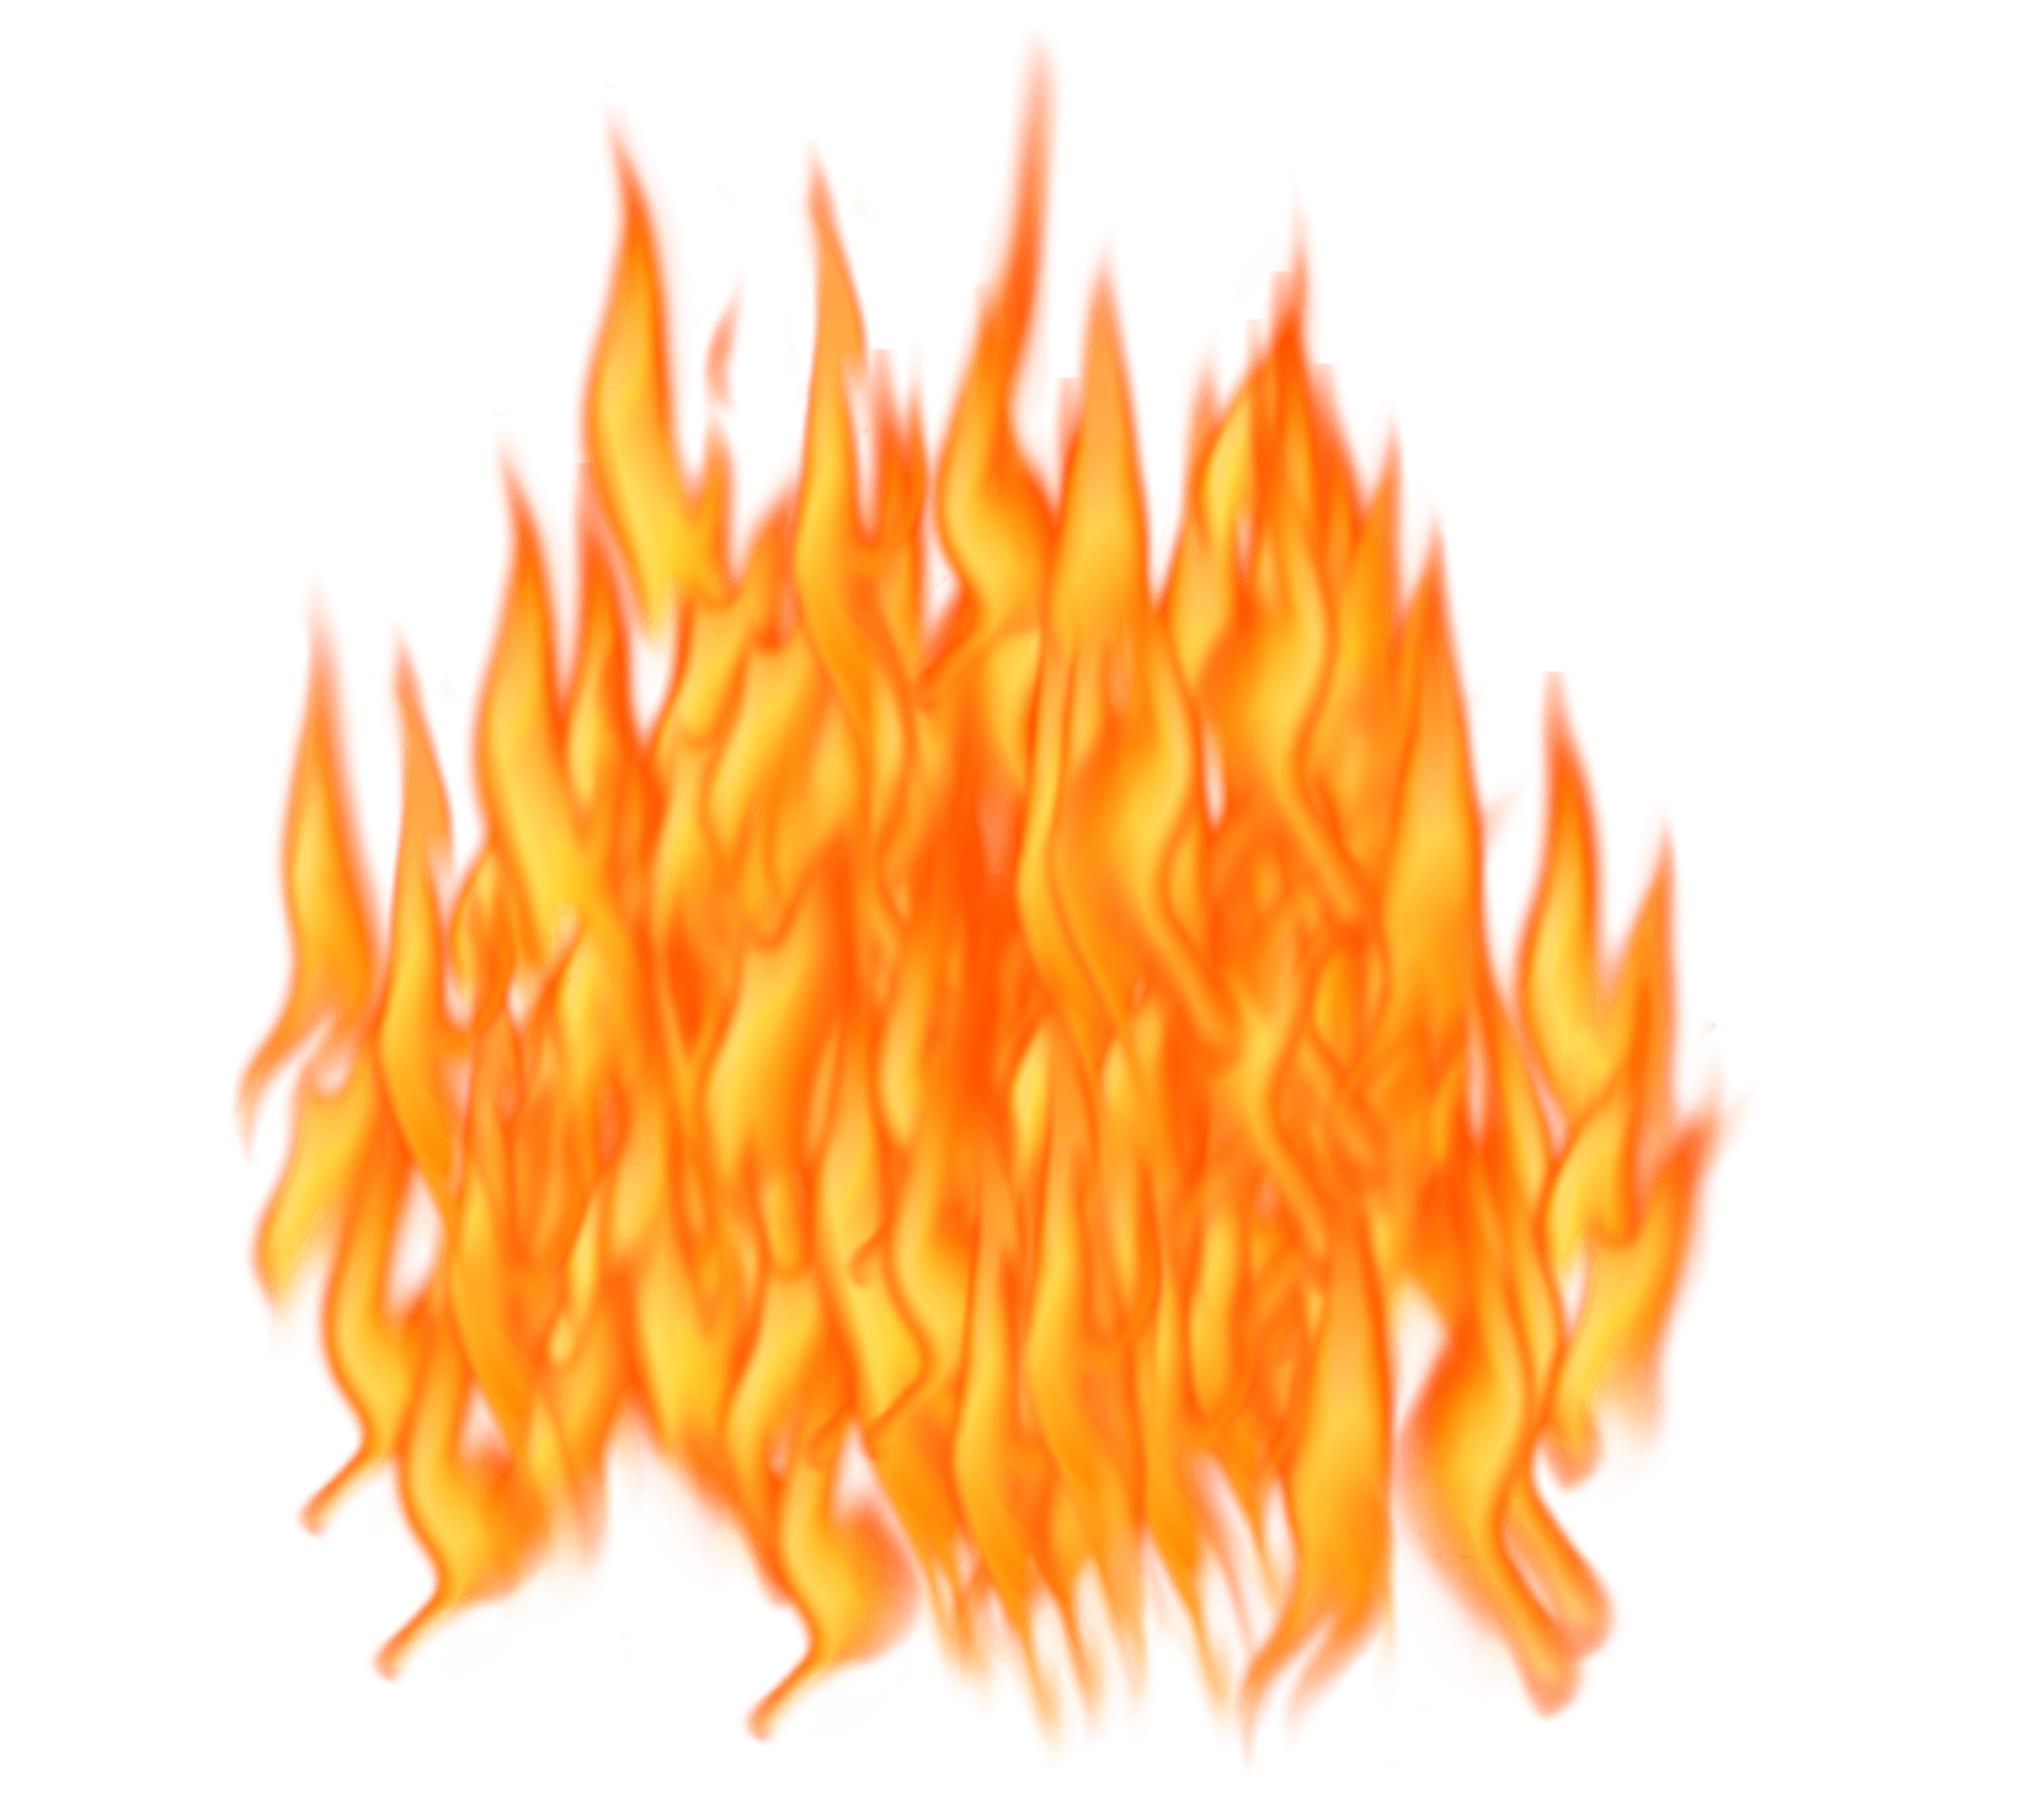 Meteor clipart flaming. Flame fire png images